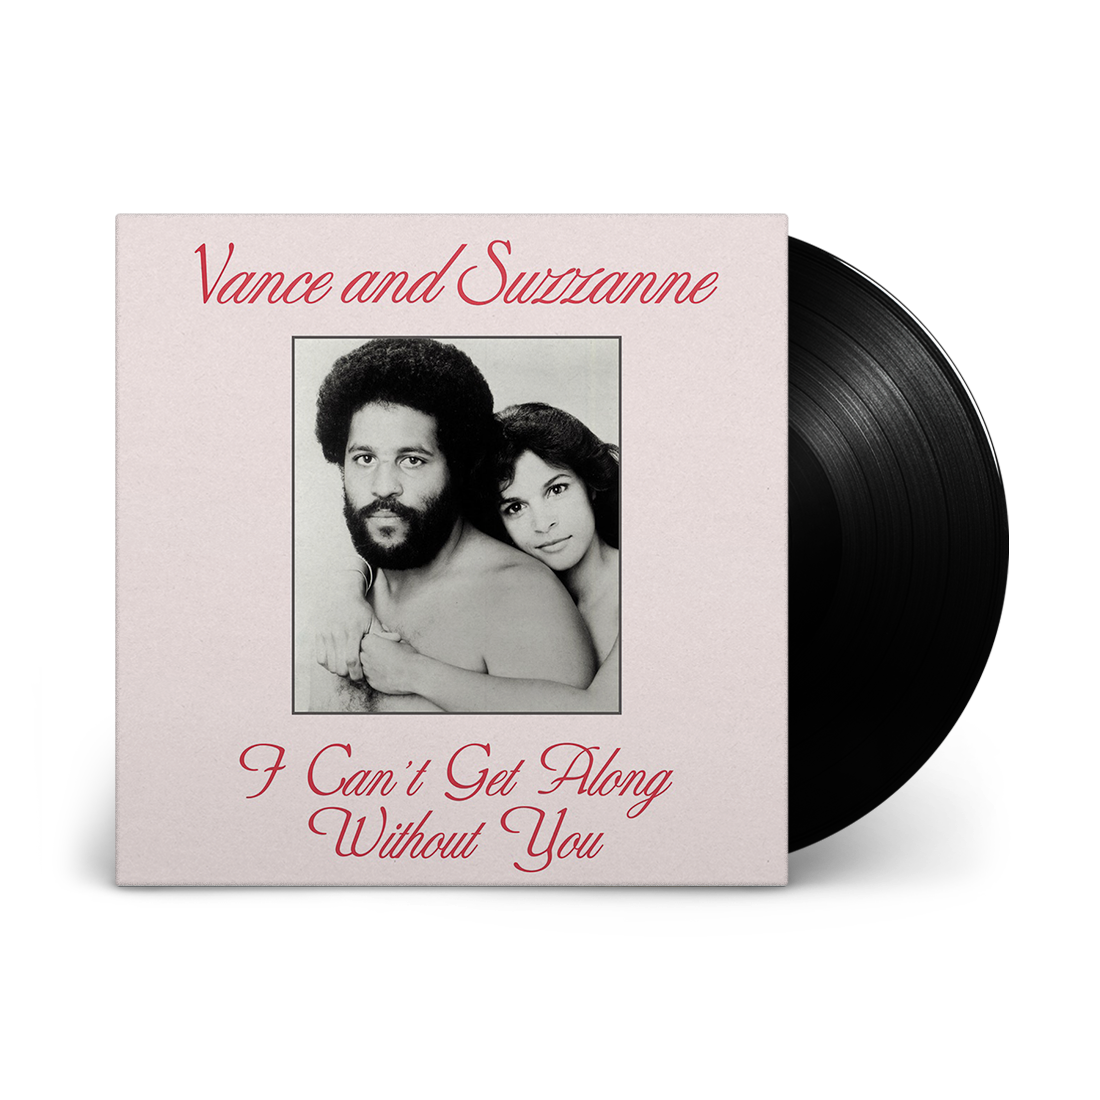 Vance And Suzzanne - I Can't Get Along Without You (Repress): Vinyl 12" Single